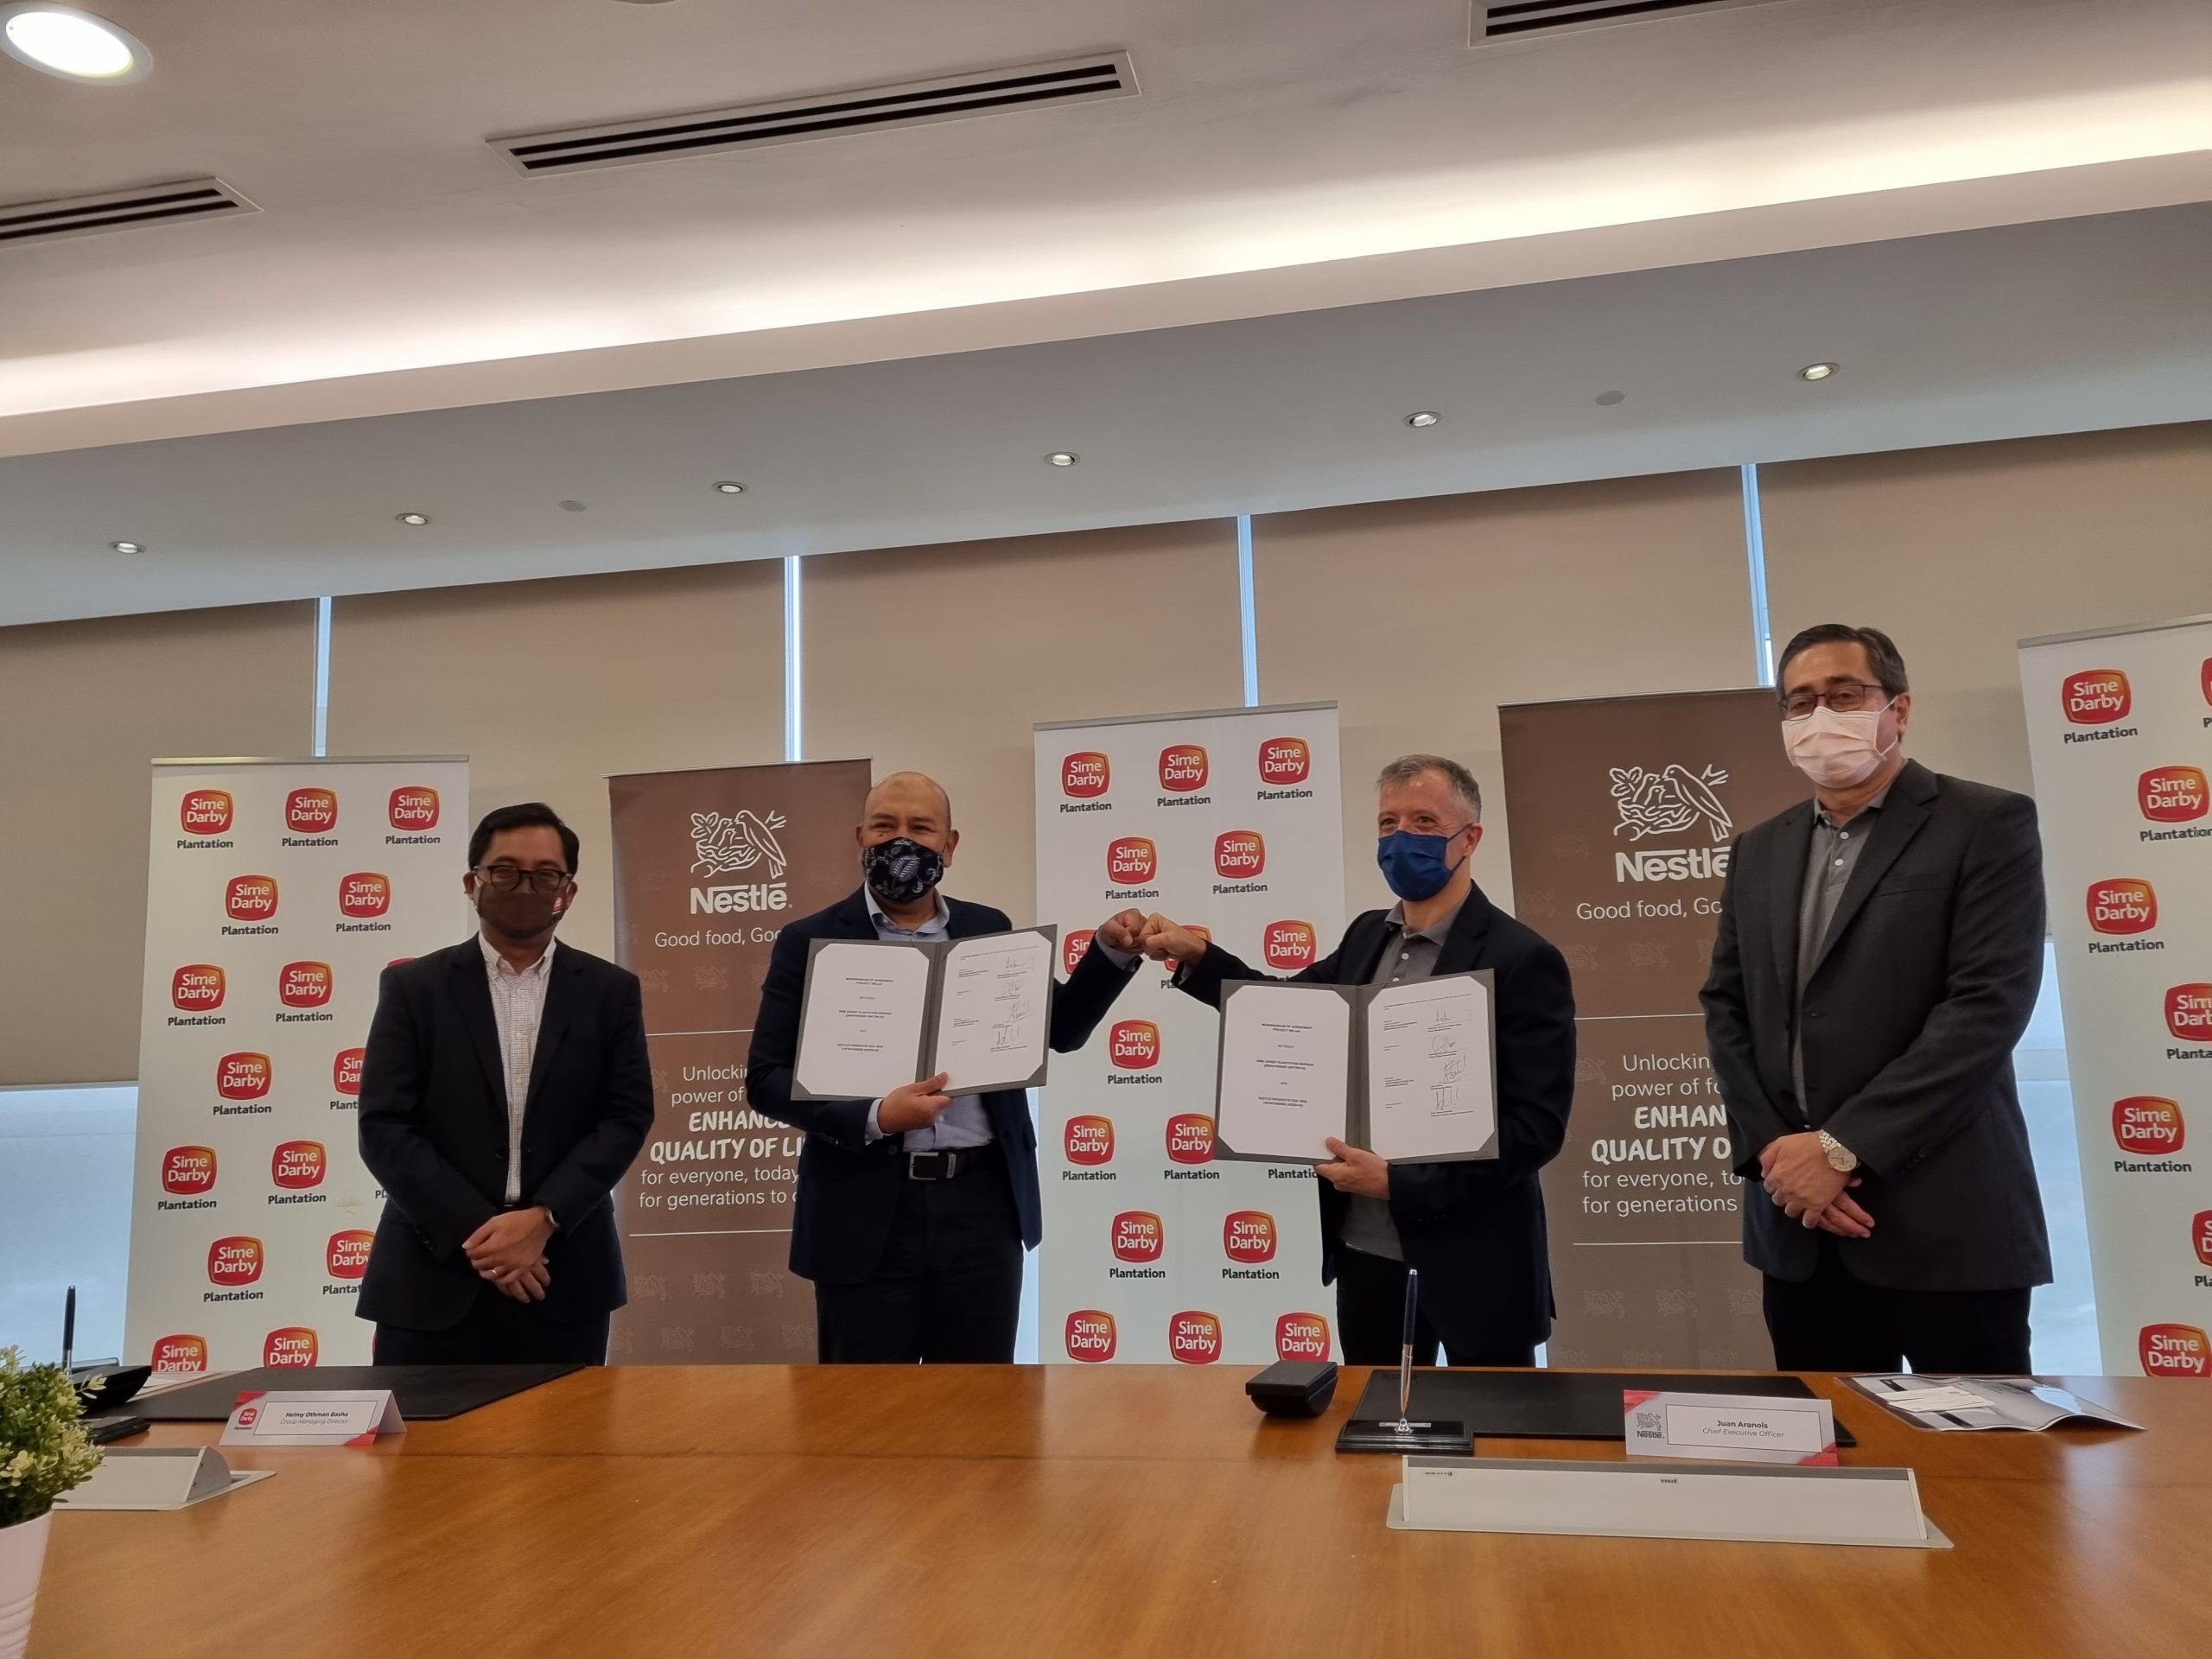 Nestlé Malaysia Teams Up with Sime Darby Plantation to Accelerate Reforestation Efforts to Fight Climate Change